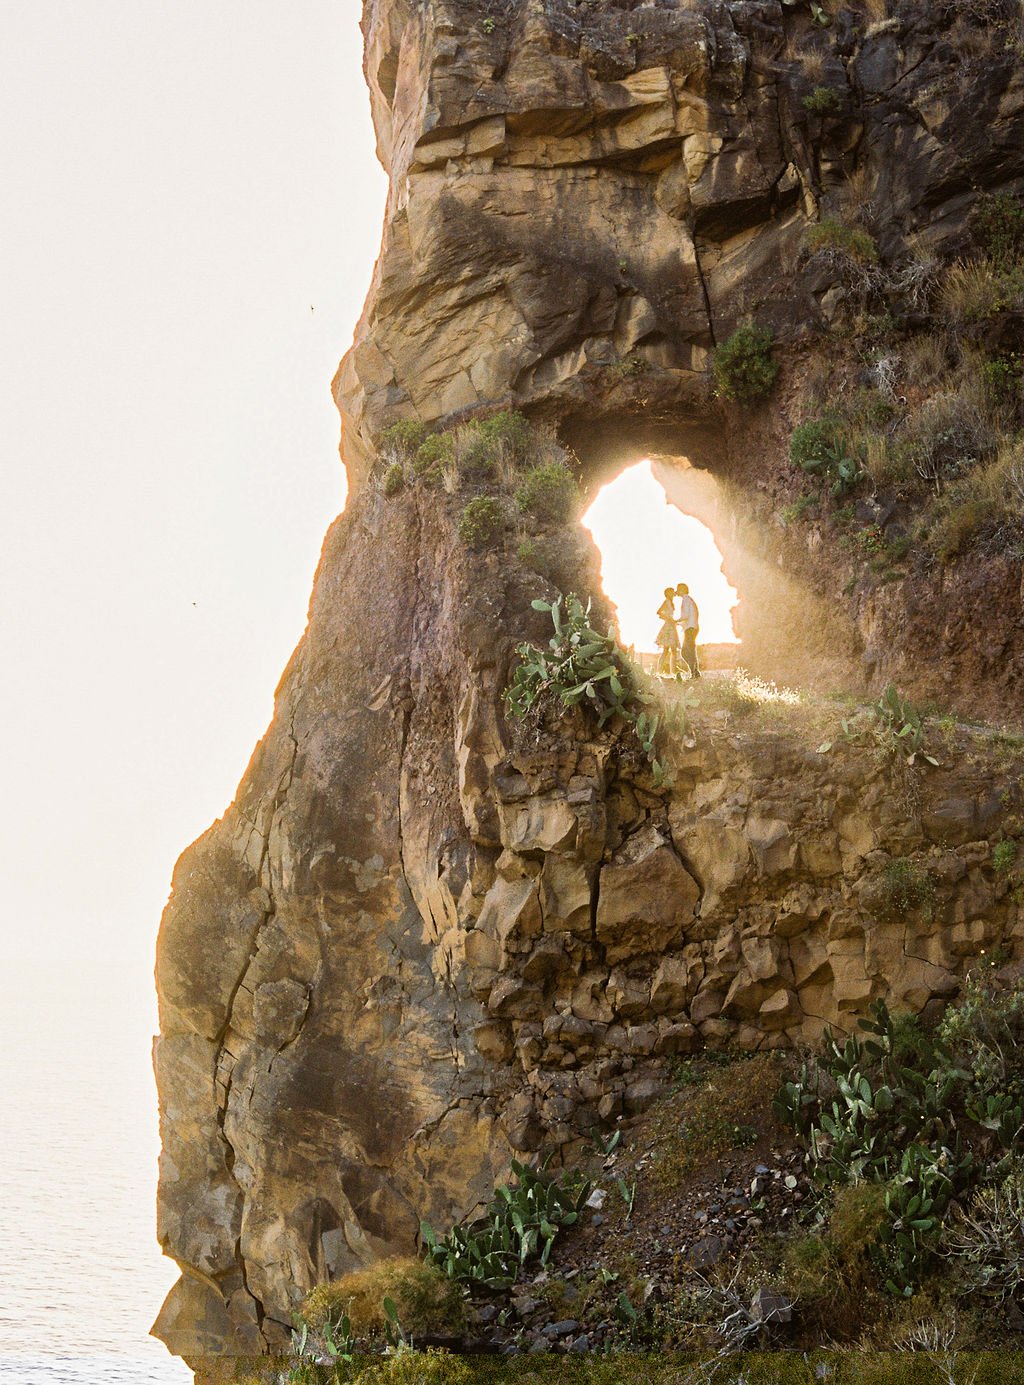 A breathtaking image of an arche formed withing a cliff on the side of the mountain in Madeira, with a couple kissing underneath while the light of the setting sun is coming through